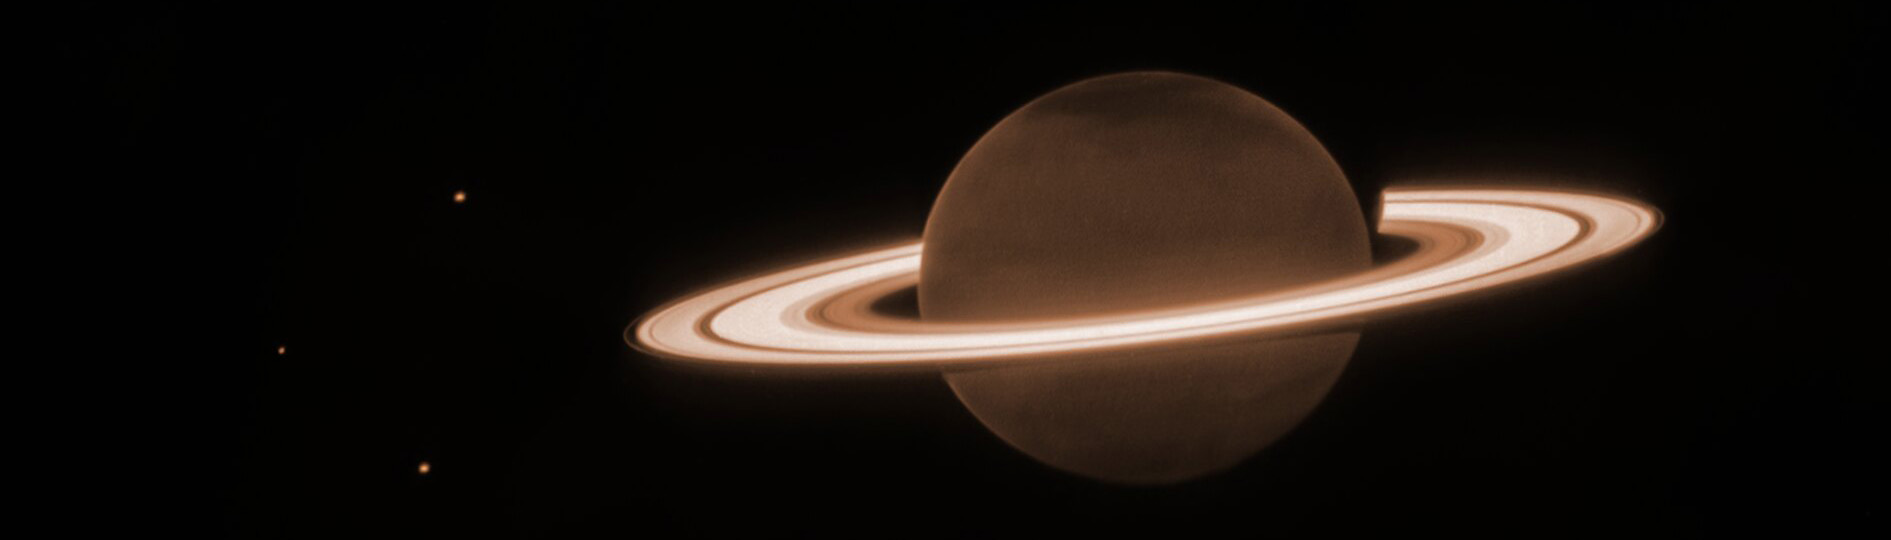 The background is mostly dark. At the center is a dark orange-brown circle, surrounded by several blazing bright, thick, horizontal whiteish rings. This is Saturn and its rings. There are three tiny dots in the image—one to the upper left of the planet, one to the direct left of the planet, and the lower left of the planet. These are three of Saturn’s moons: Dione, Enceladus, and Tethys, respectively. There is a slightly darker tint at the northern and southern poles of the planet. The rings surrounding Saturn are mostly broad, with a few singular narrow gaps between the broader rings. There is an innermost, thicker ring, and next to that is a brighter, wider ring. Traveling farther outward, there is a small dark gap before another thicker ring. In the thicker ring, there is a narrow faint band. There is then an outermost, faintest, thinnest ring.